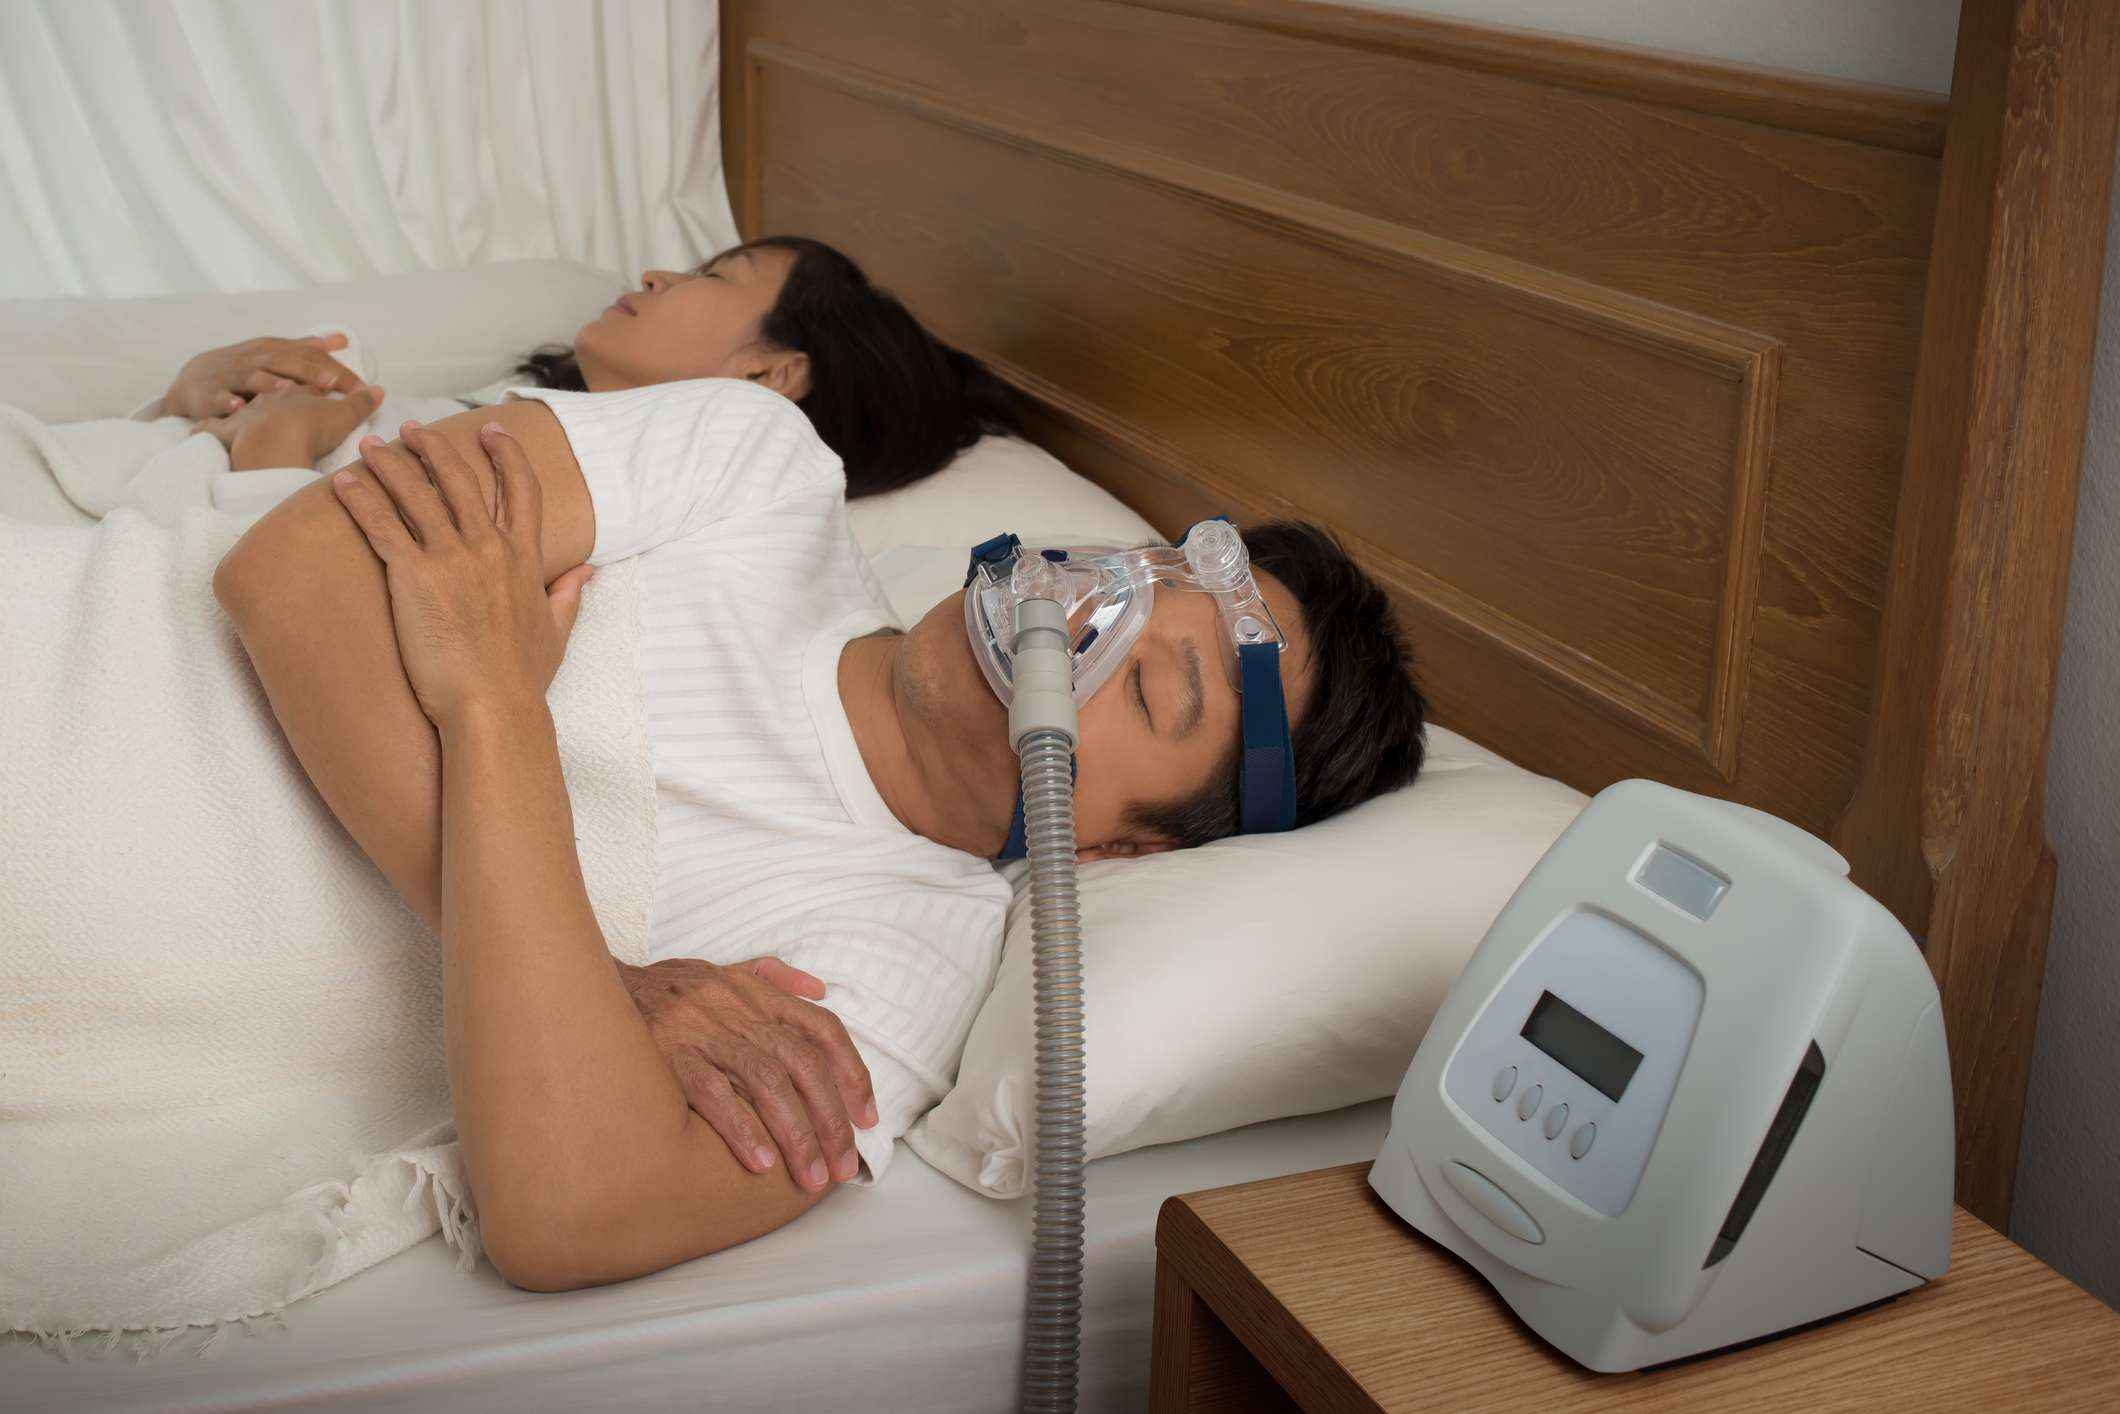 Problems and side effects associated with CPAP masks